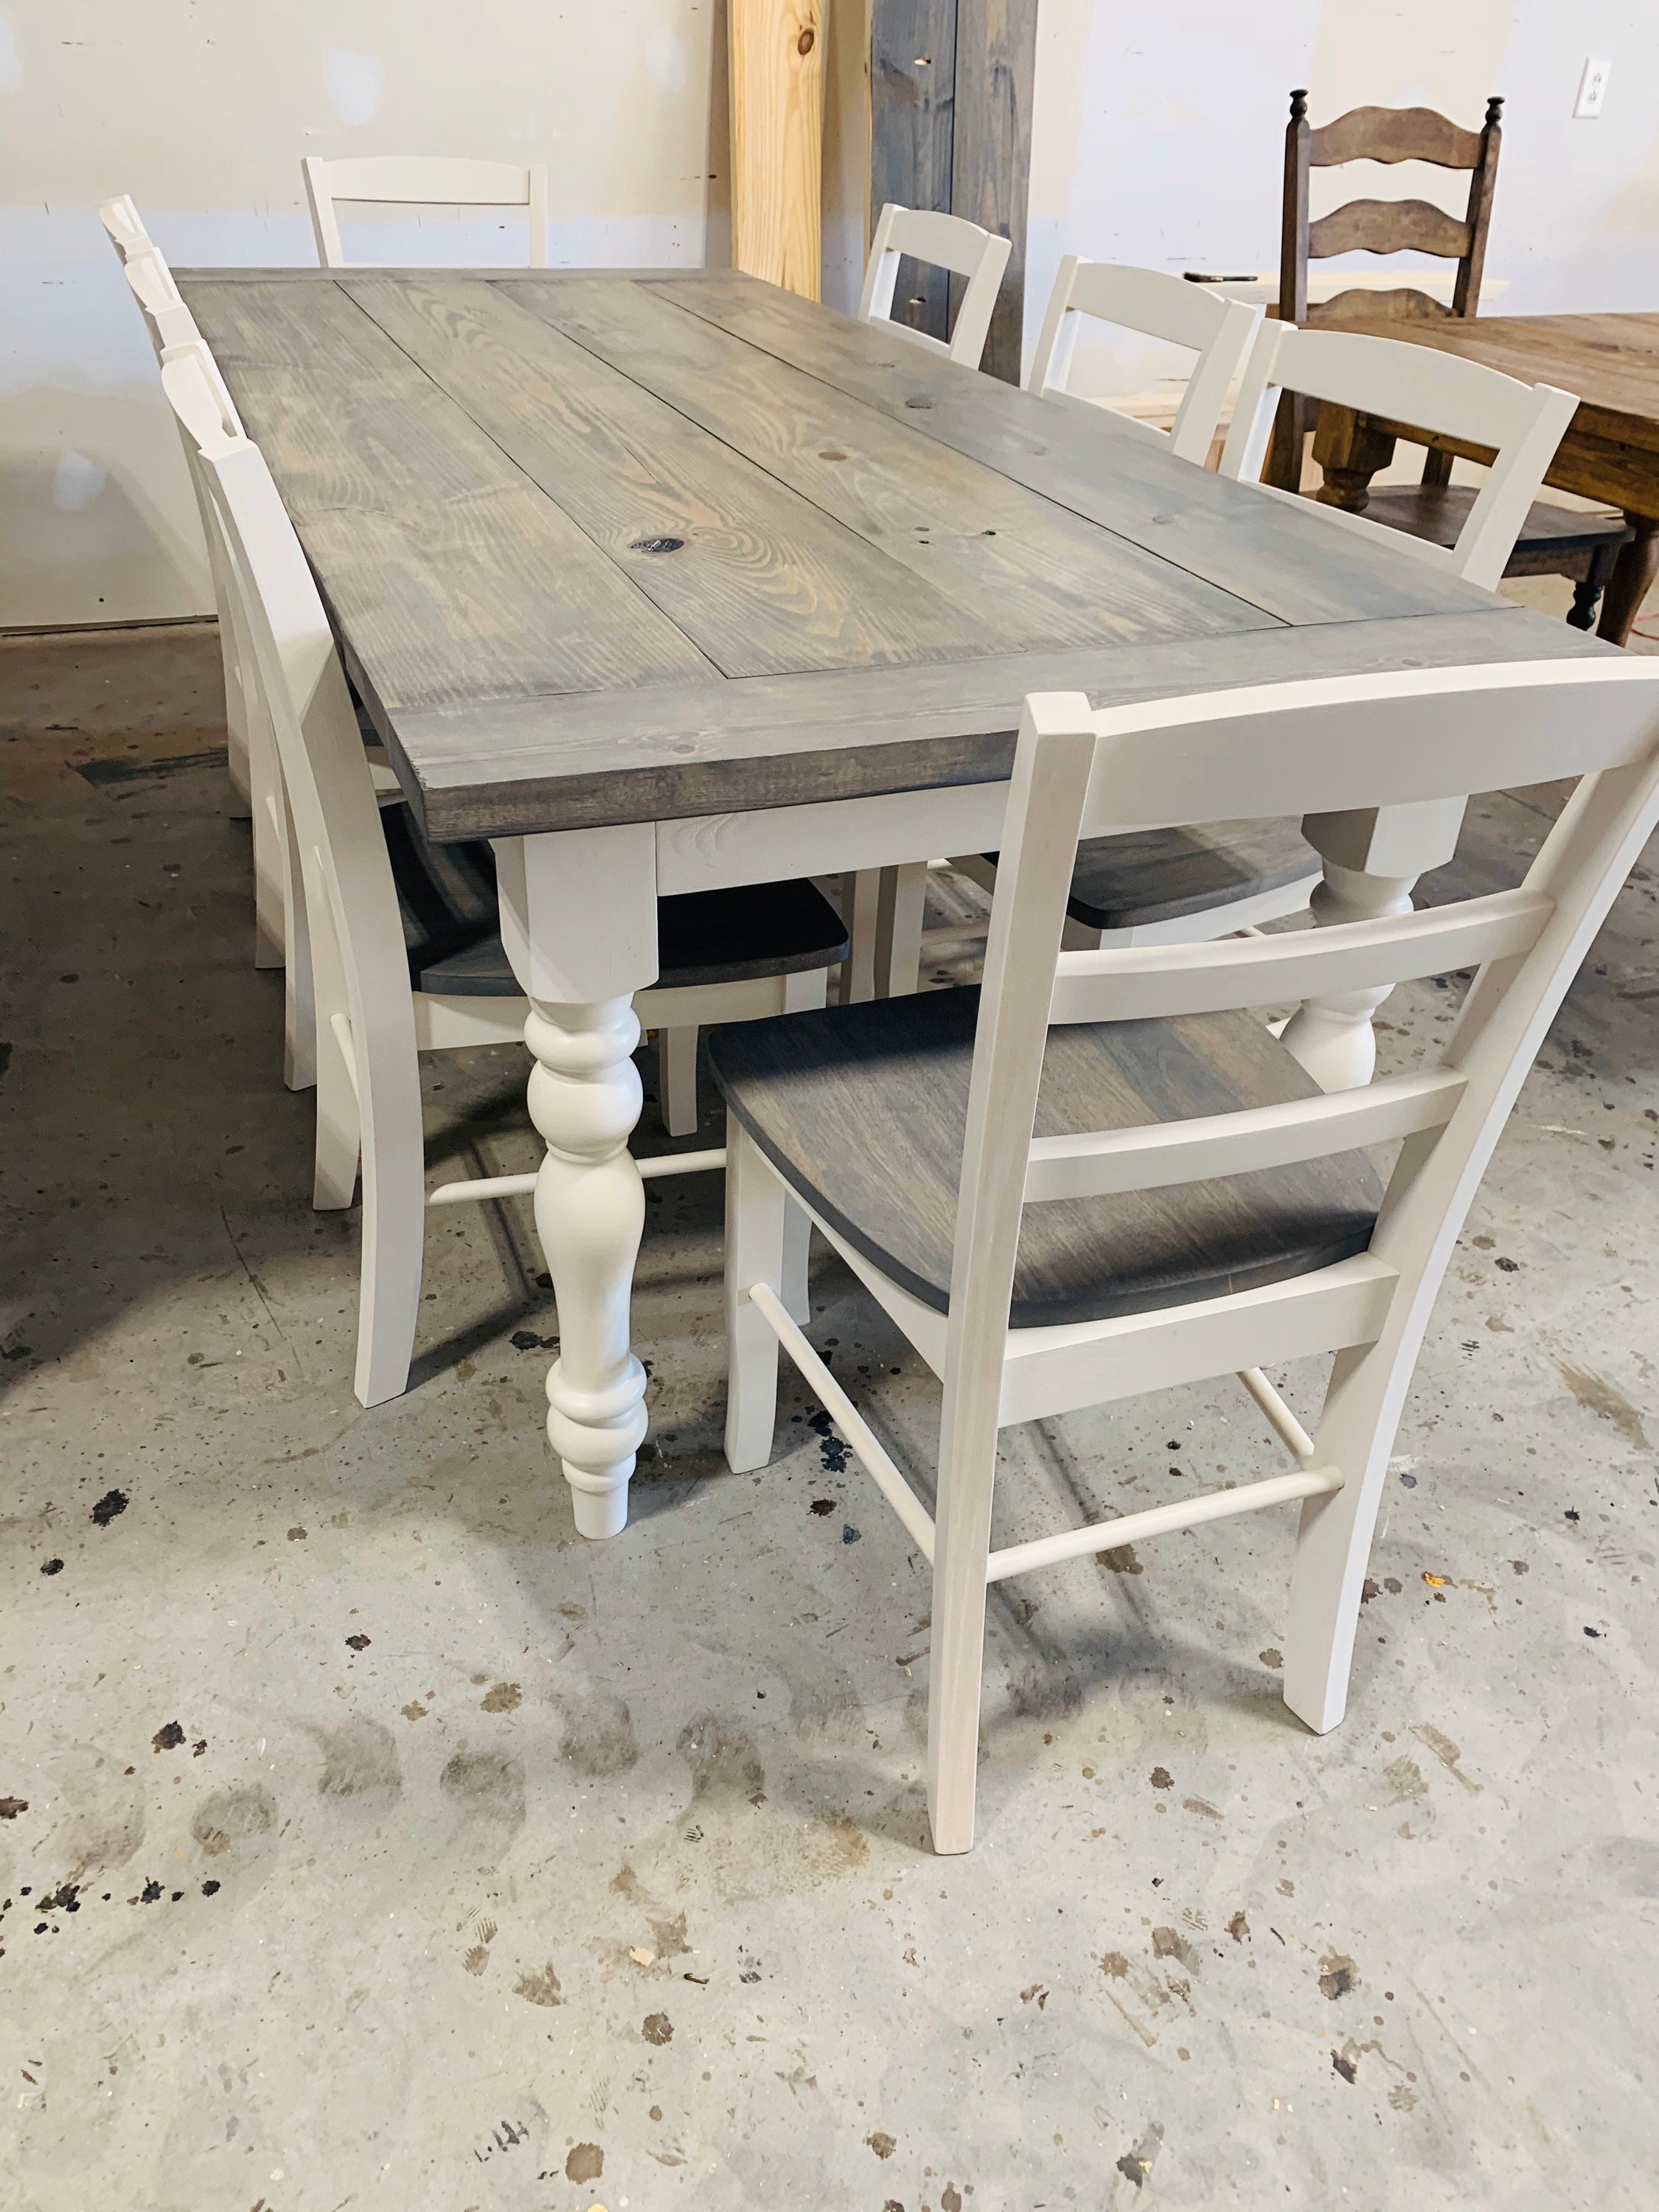 7ft Rustic Farmhouse Table with Turned Legs, Chair Set Classic Gray Top